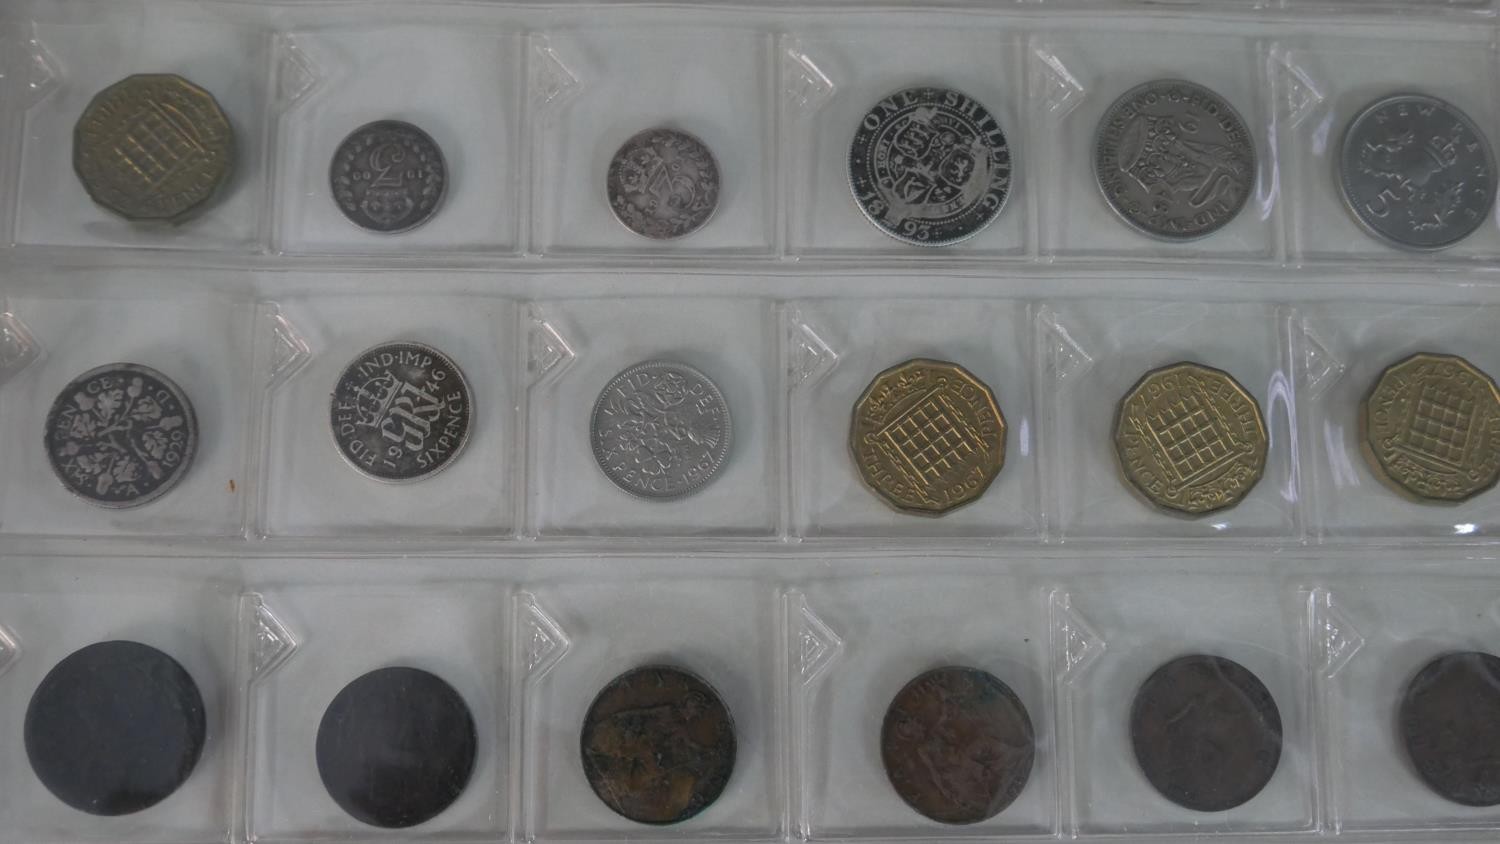 An album of world stamps along with a British Collecta coin album filled with various British coins. - Image 14 of 15